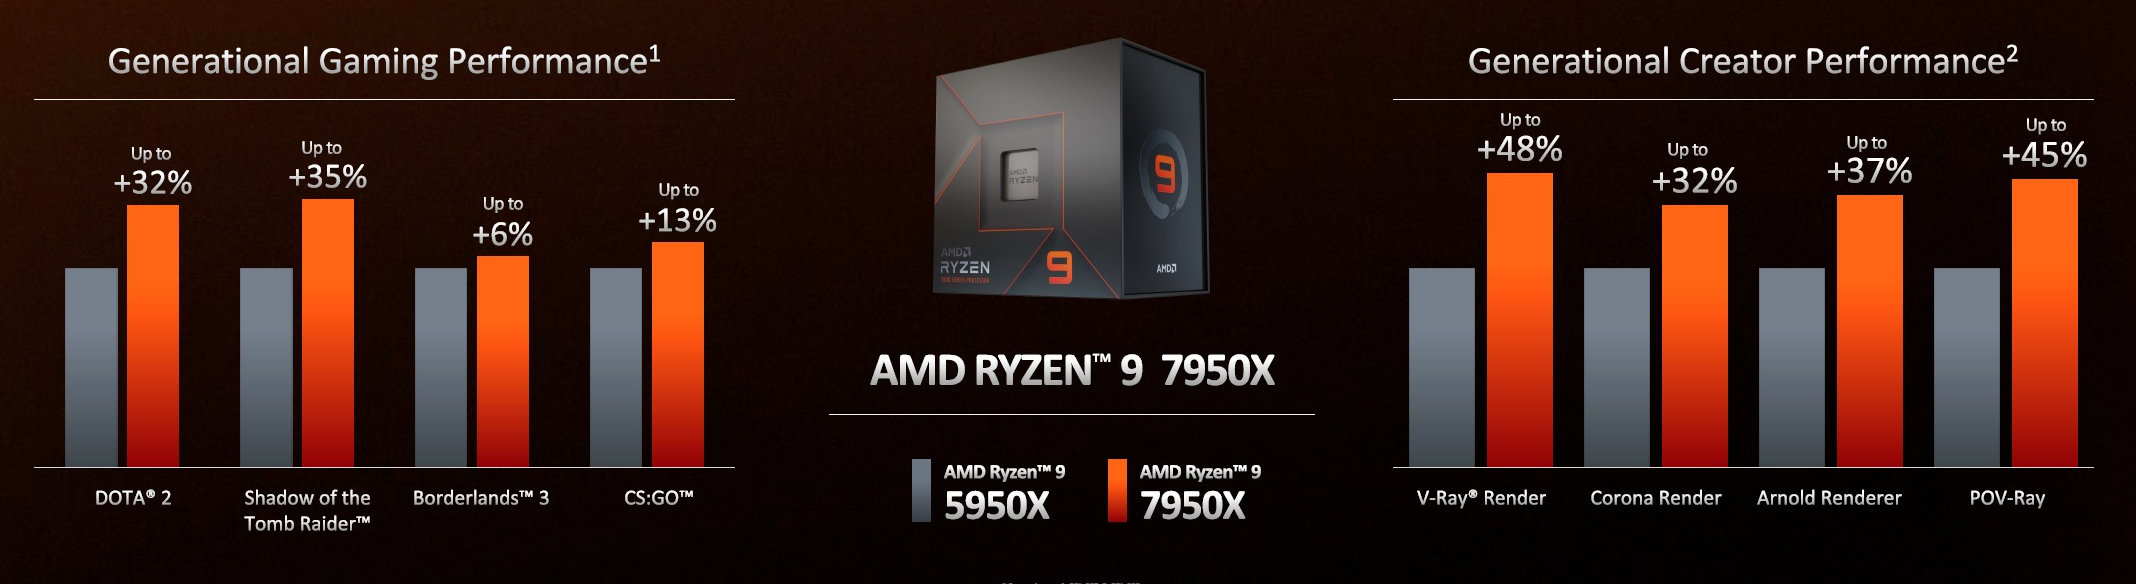 New AMD Ryzen 9 5950X 3.4 GHz (16-core) Processors are here